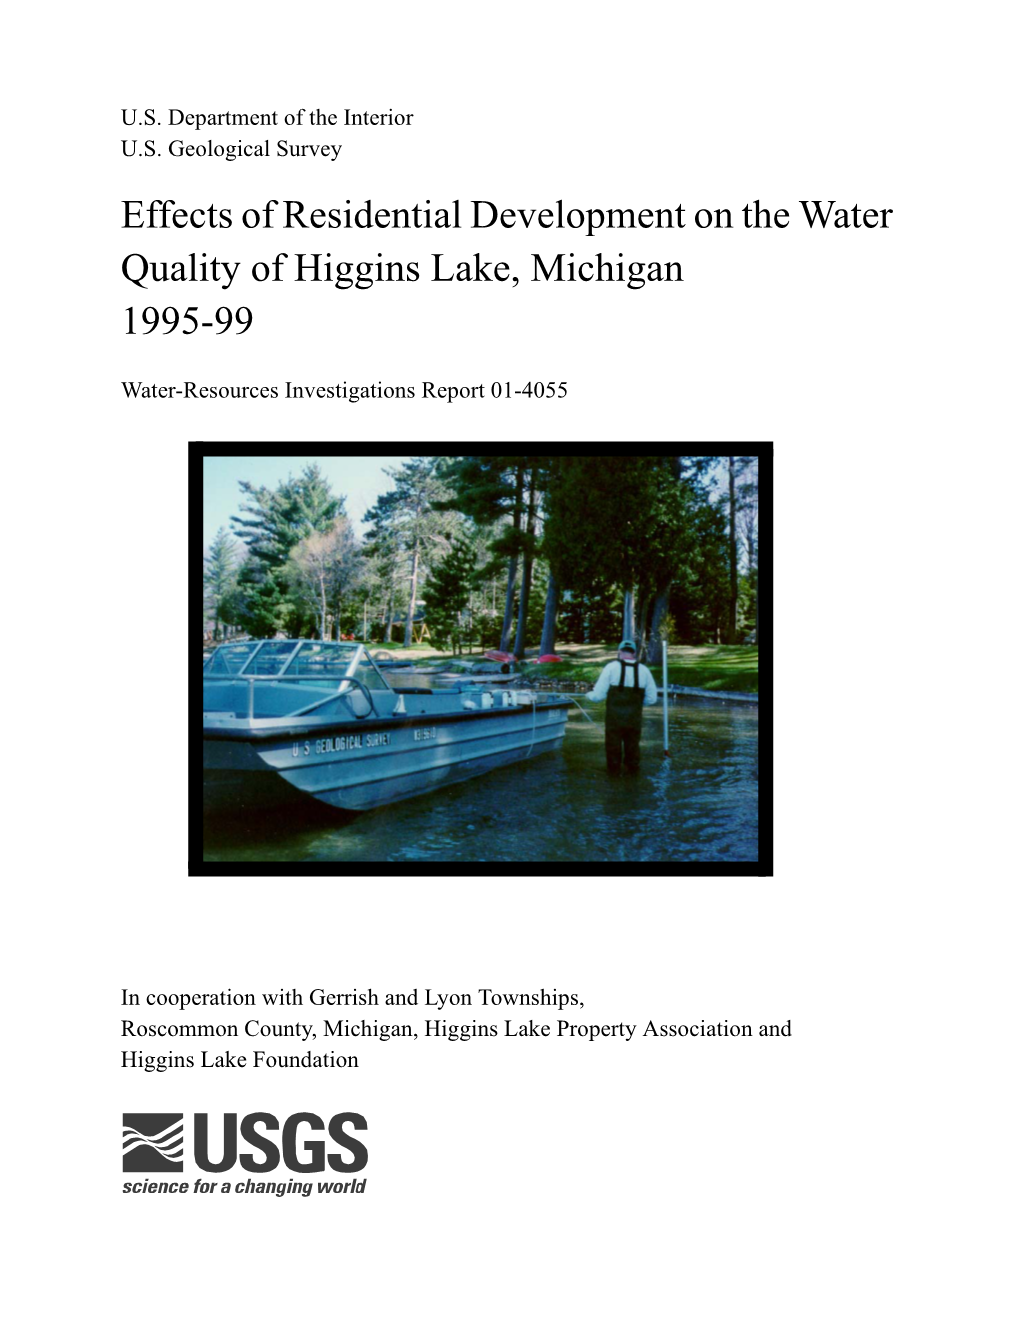 Effects of Residential Development on the Water Quality of Higgins Lake, Michigan 1995-99